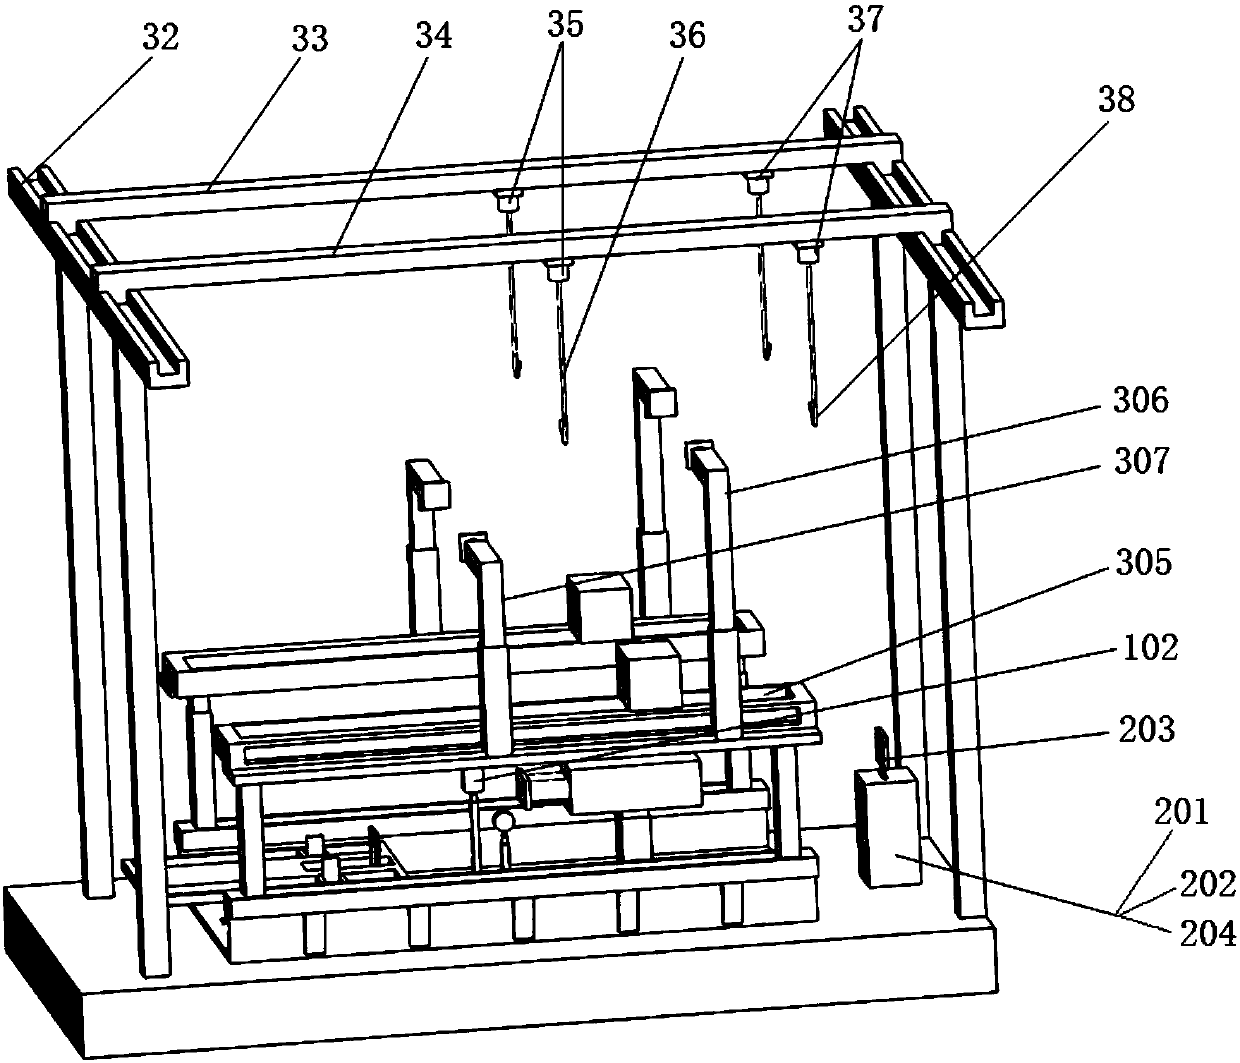 A working method for intelligent installation of heavy hydraulic supports